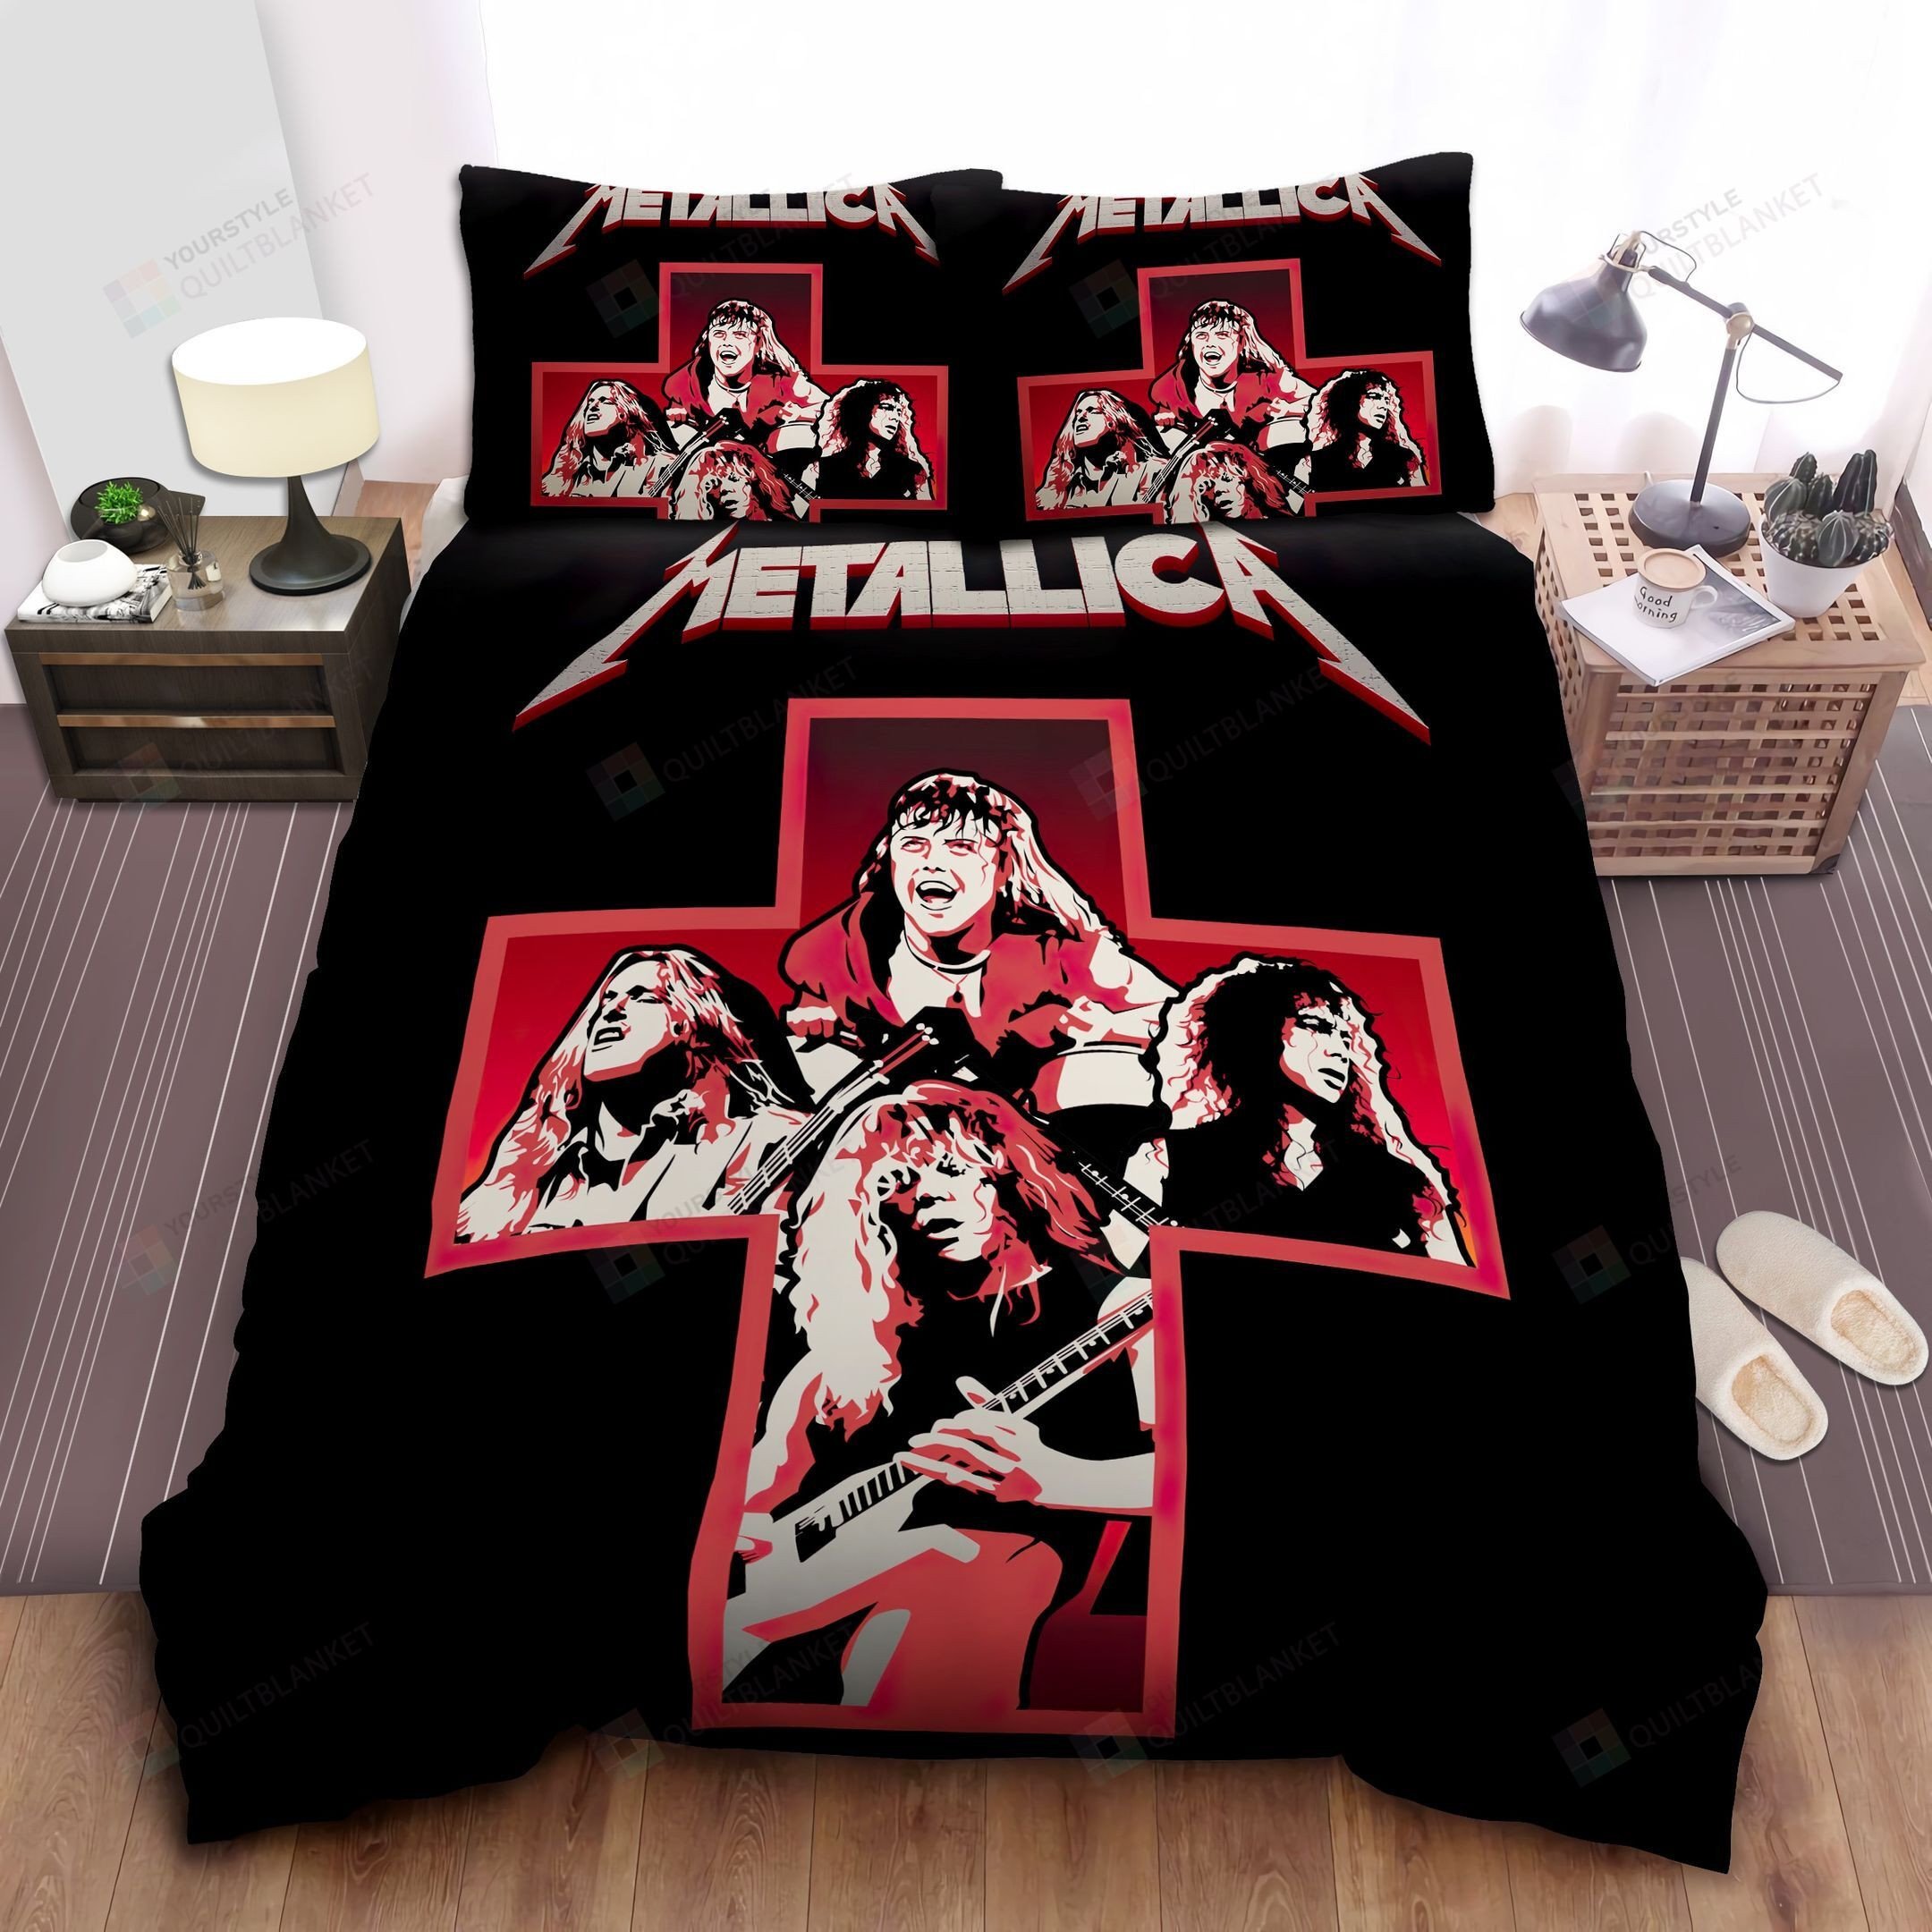 Metallica In Red Cross Sign Bed Sheet Duvet Cover Bedding Sets - HomeFavo